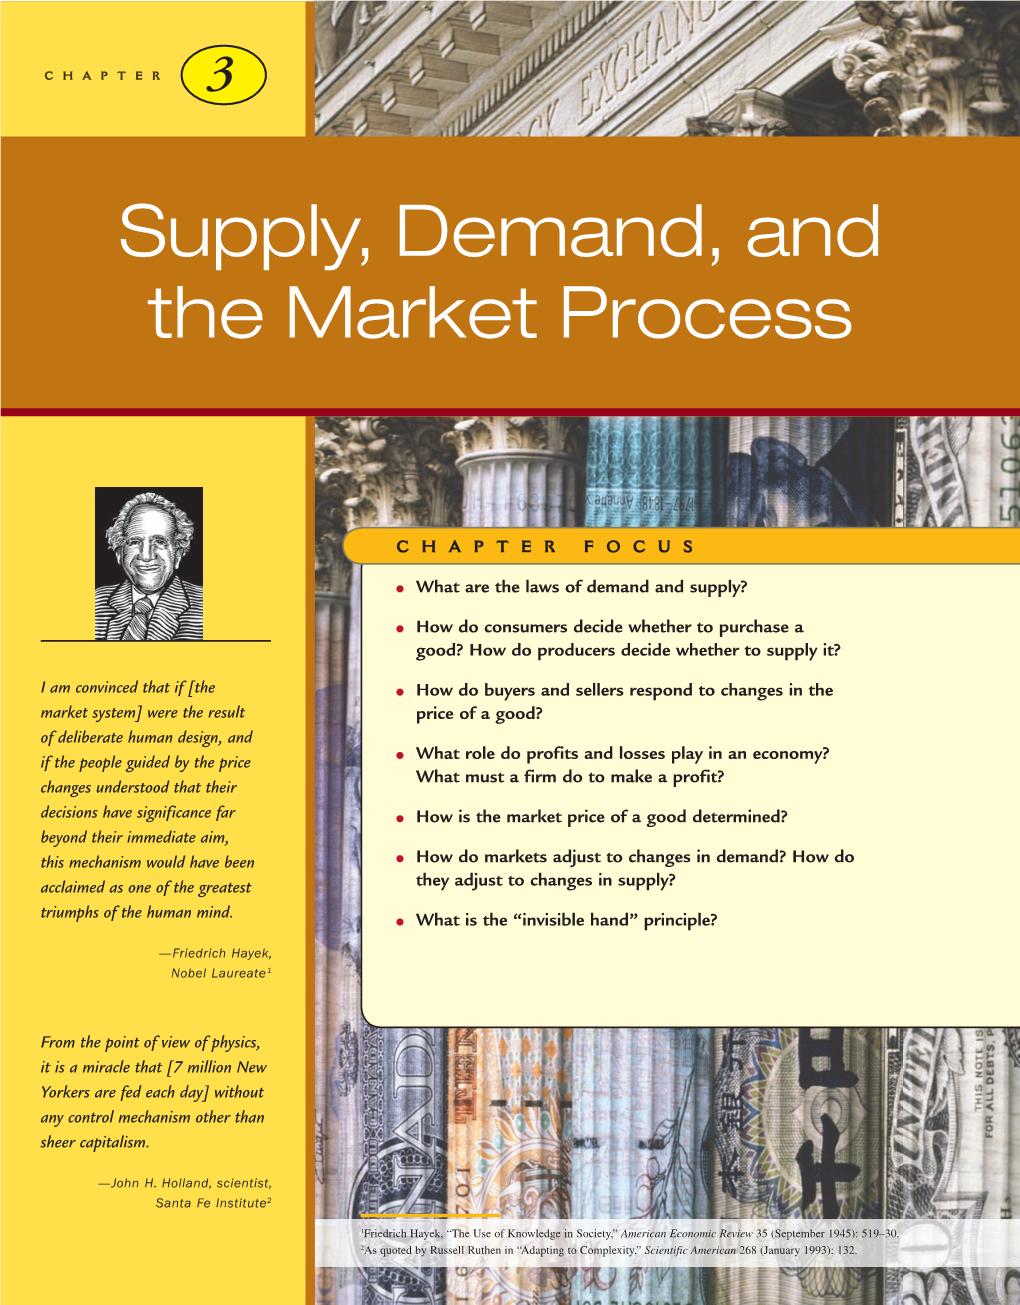 Supply, Demand, and the Market Process